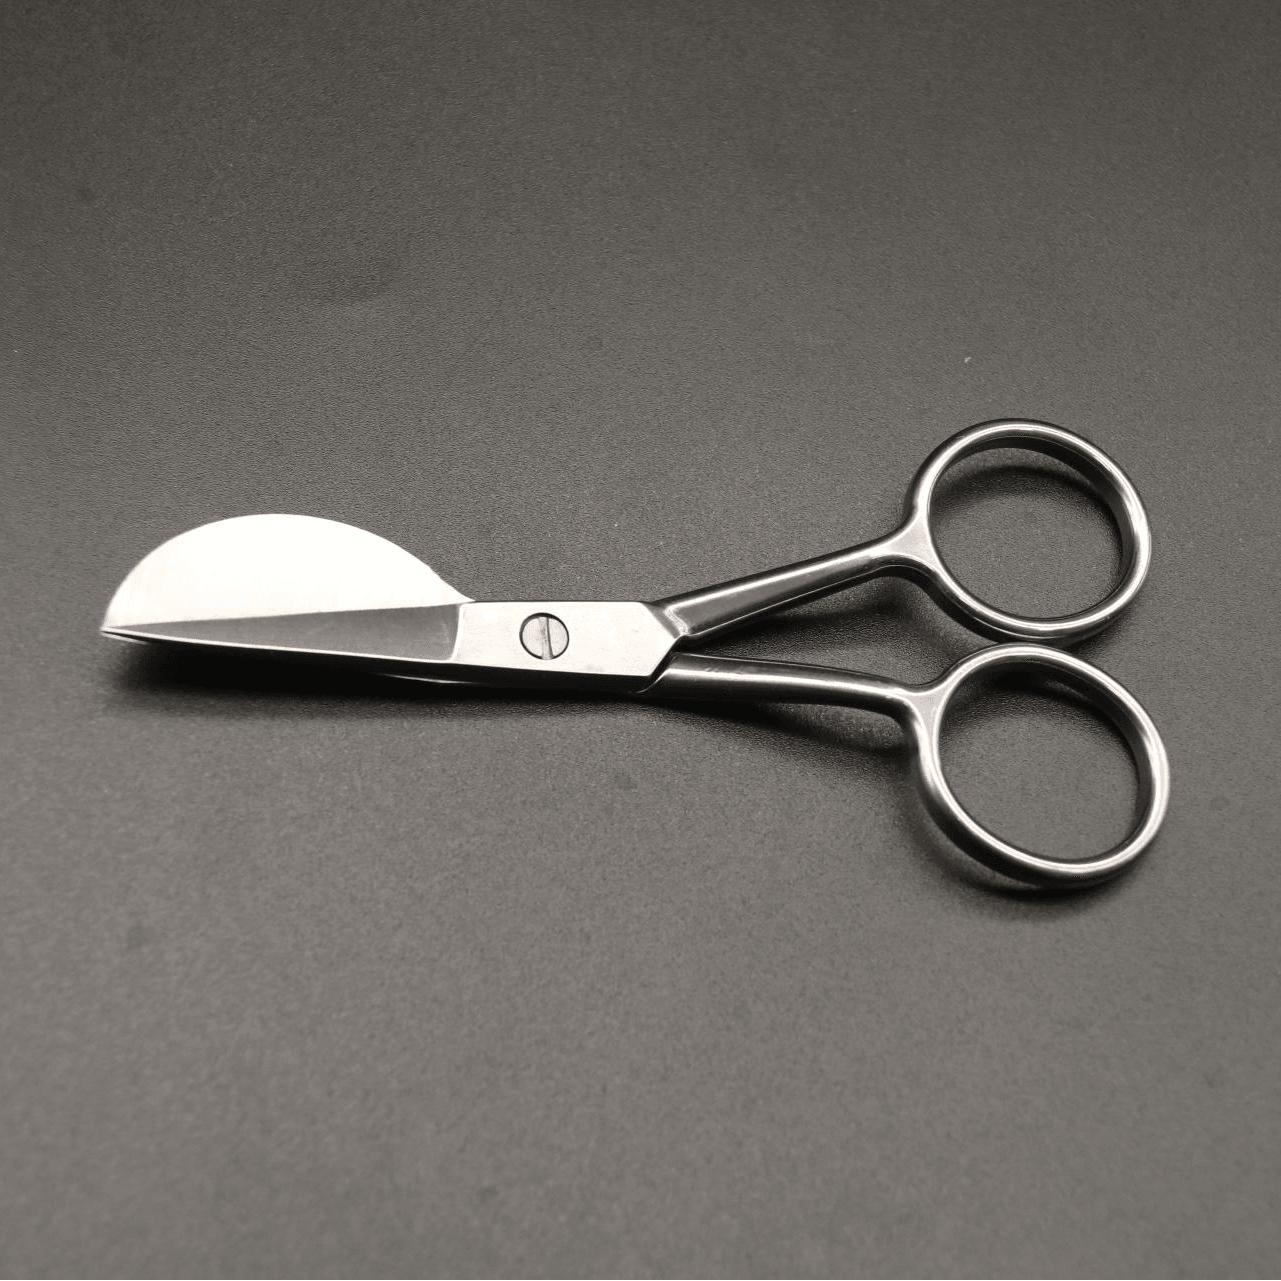 20 PELICAN BILL APPLIQUE SCISSORS STAINLESS STEEL – Embroidery Supply Shop